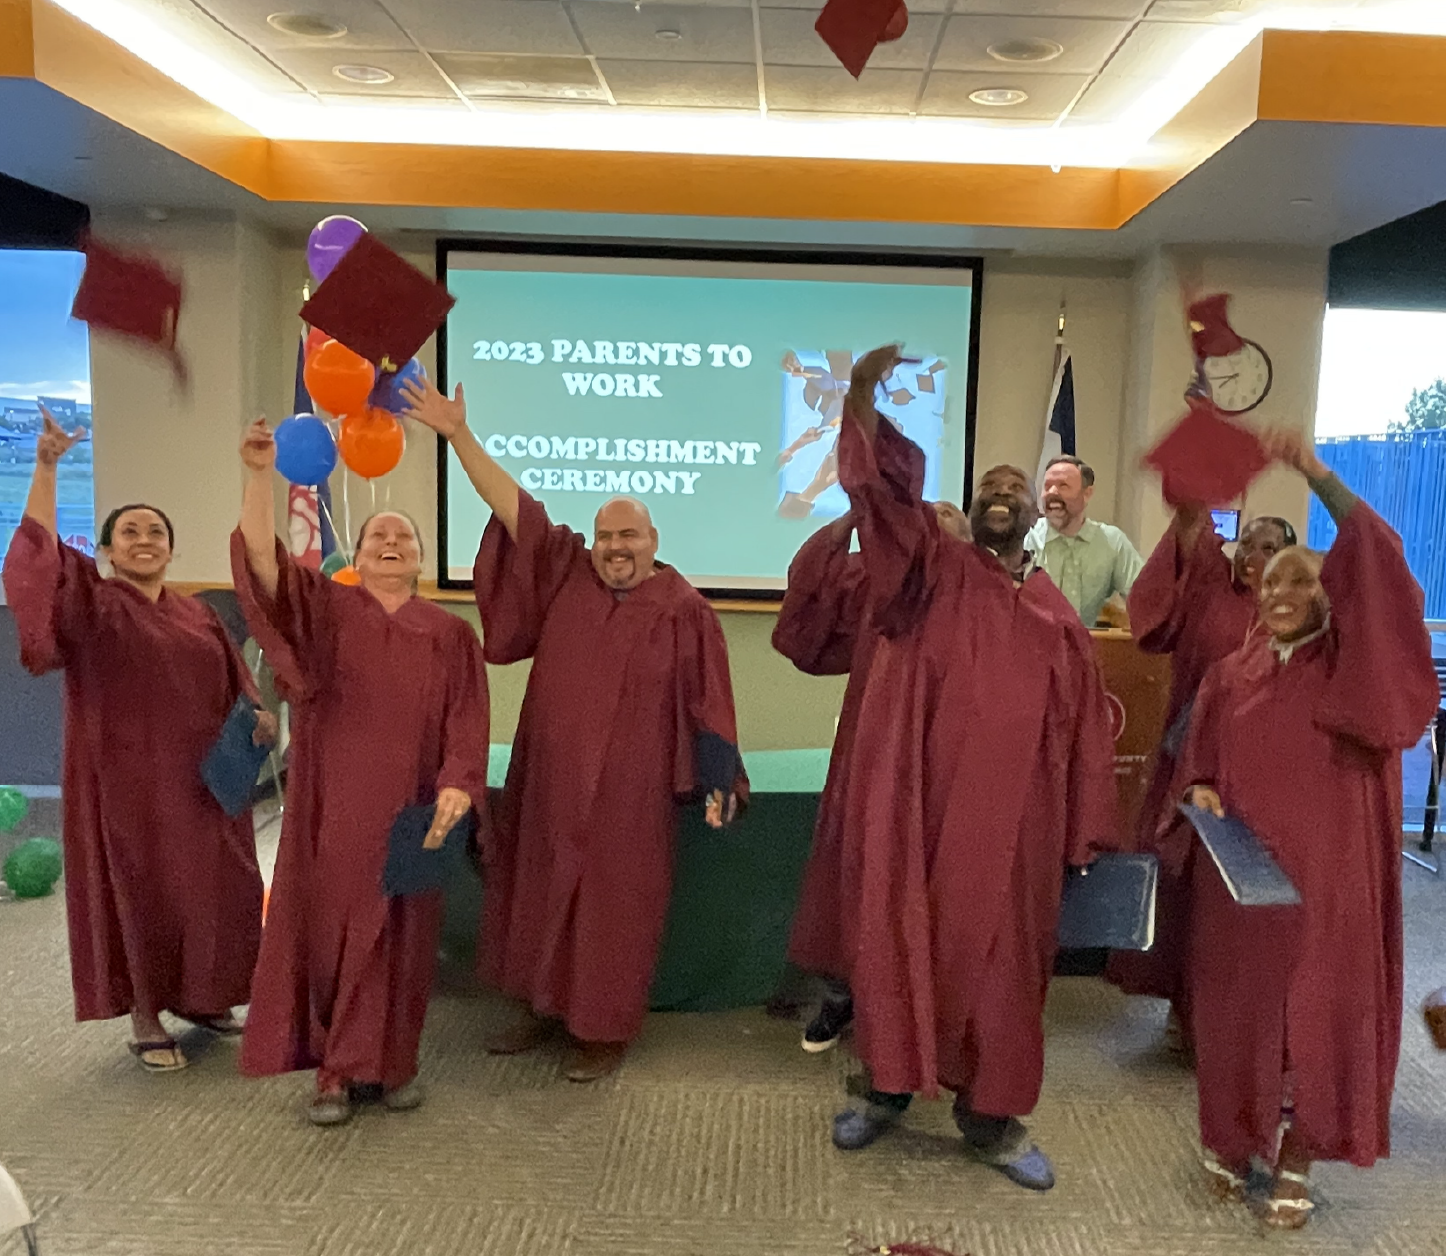 On Wednesday, August 2, 2023, the Parents to Work program hosted its annual Accomplishment Ceremony. The event was an opportunity for customers and their families to come together and celebrate […]